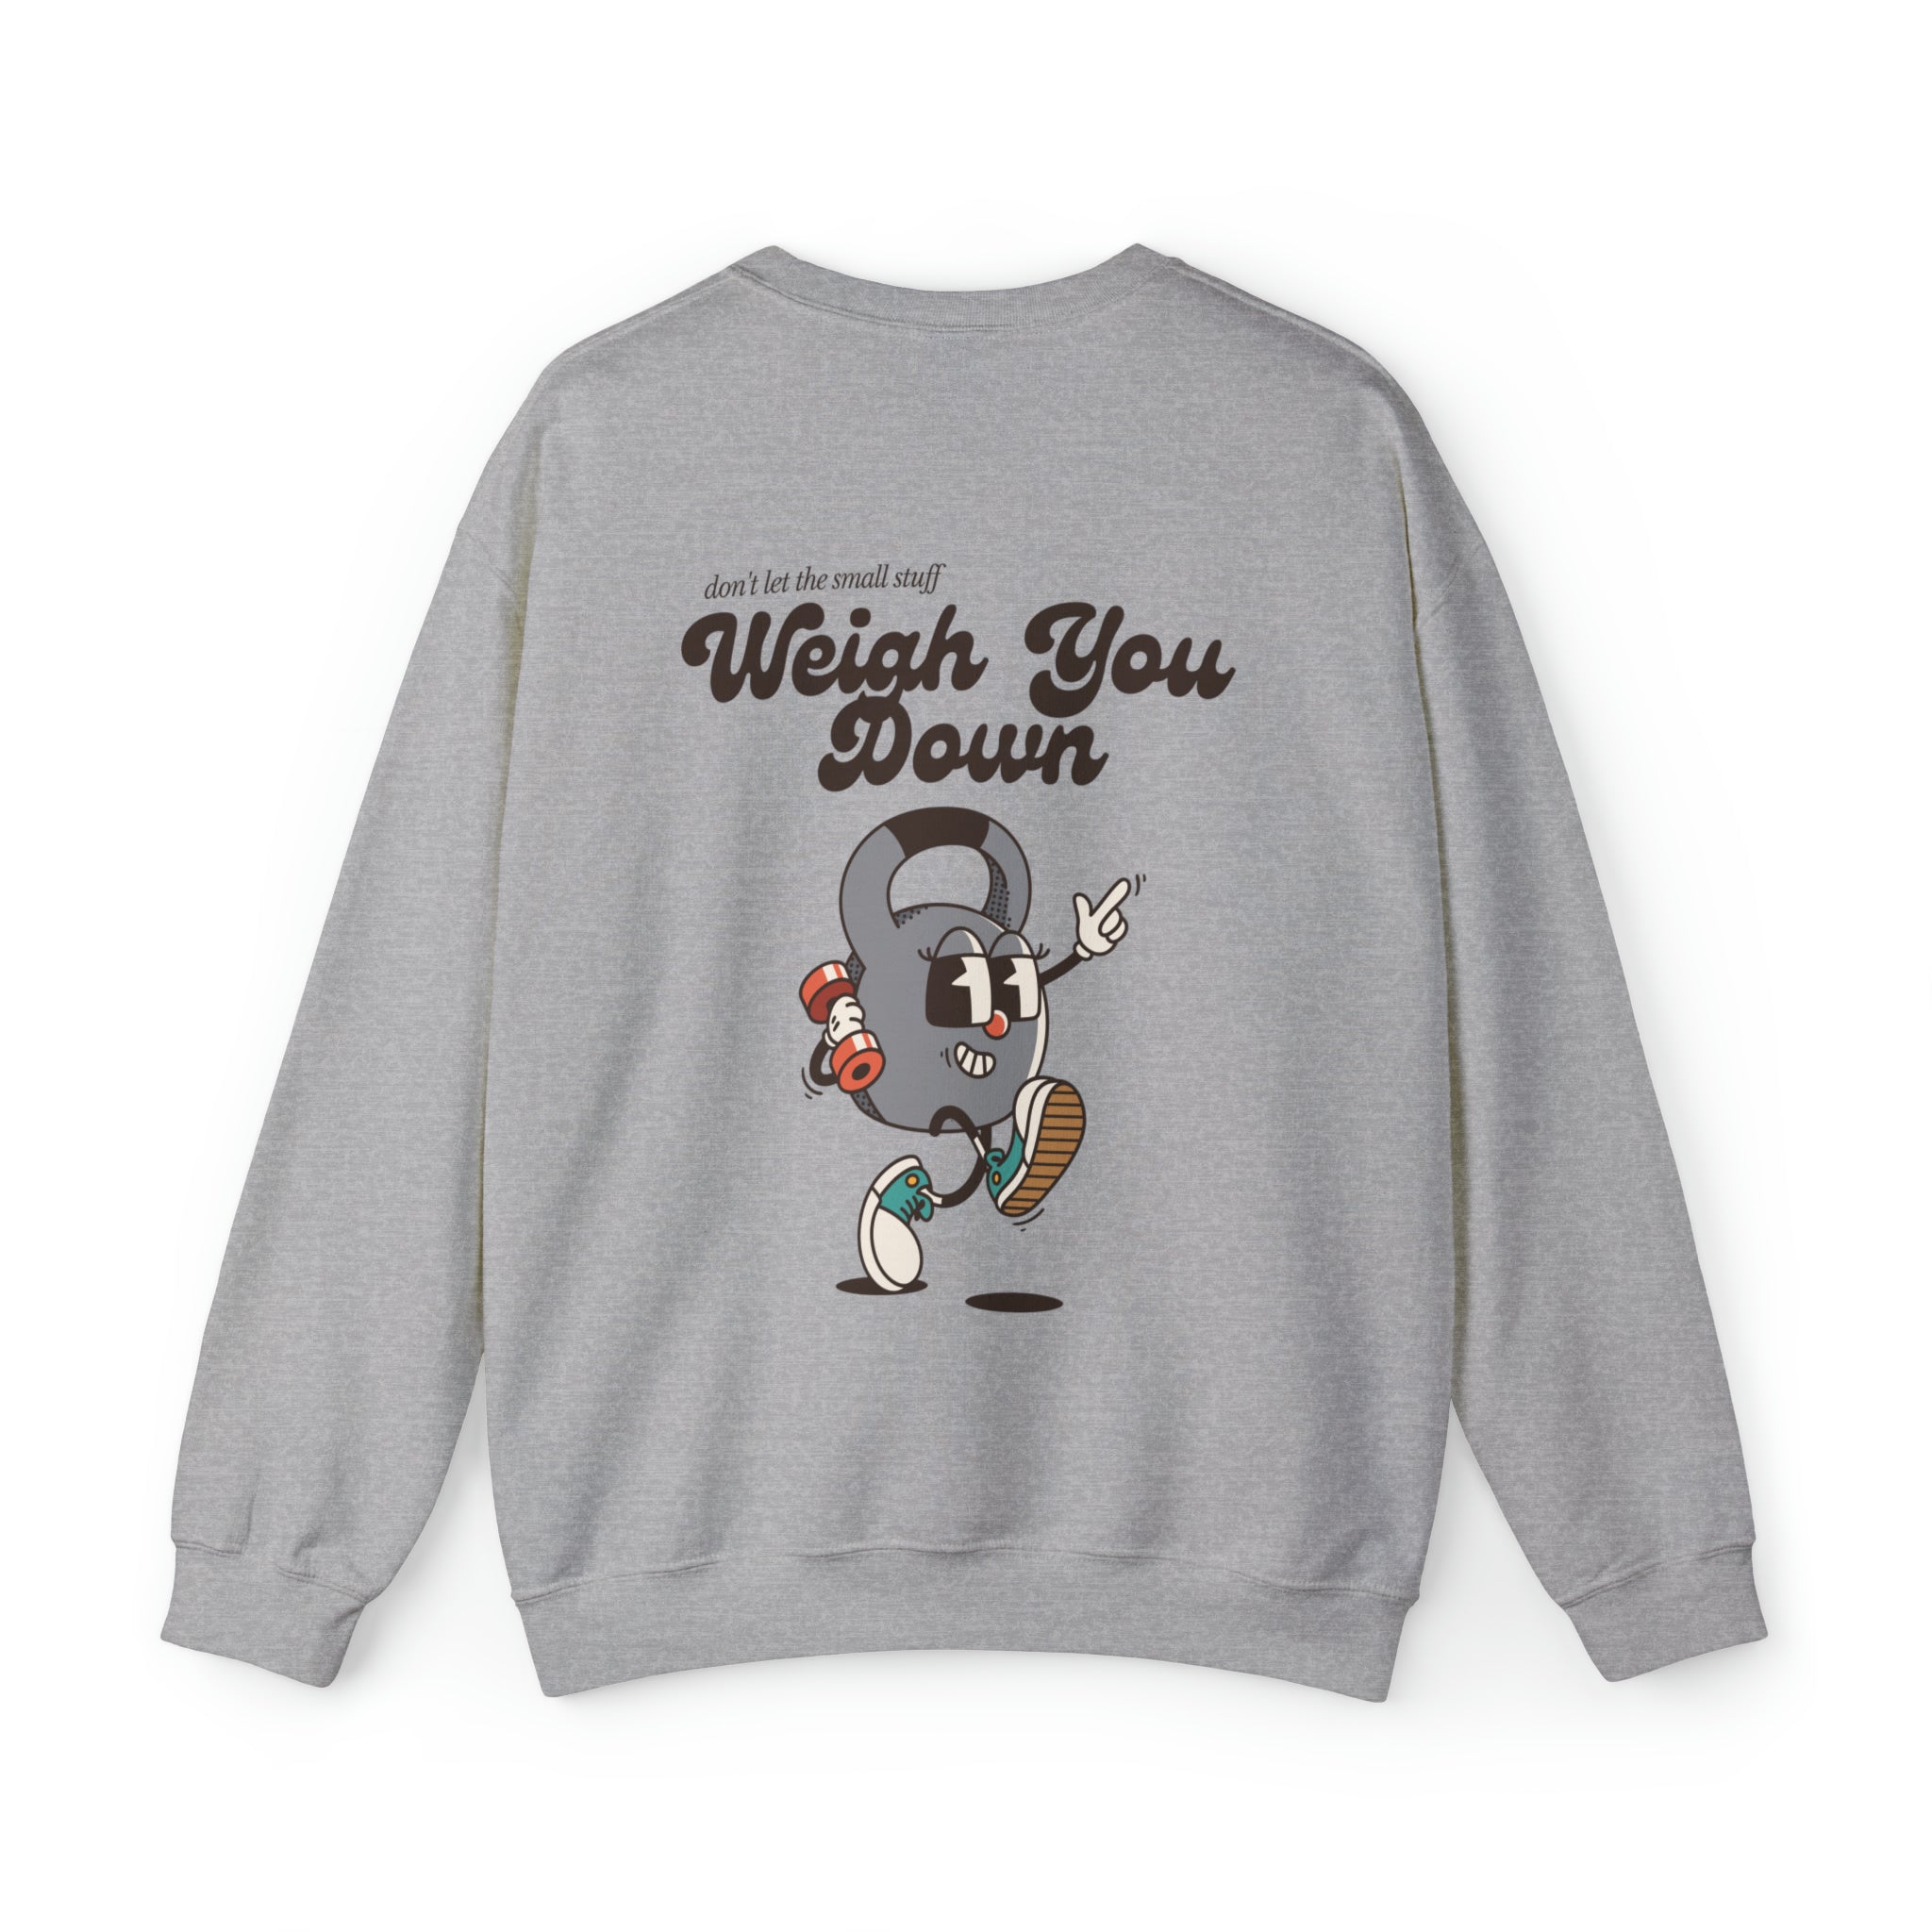 Don't Let the Small Stuff Weigh You Down Crewneck Sweatshirt